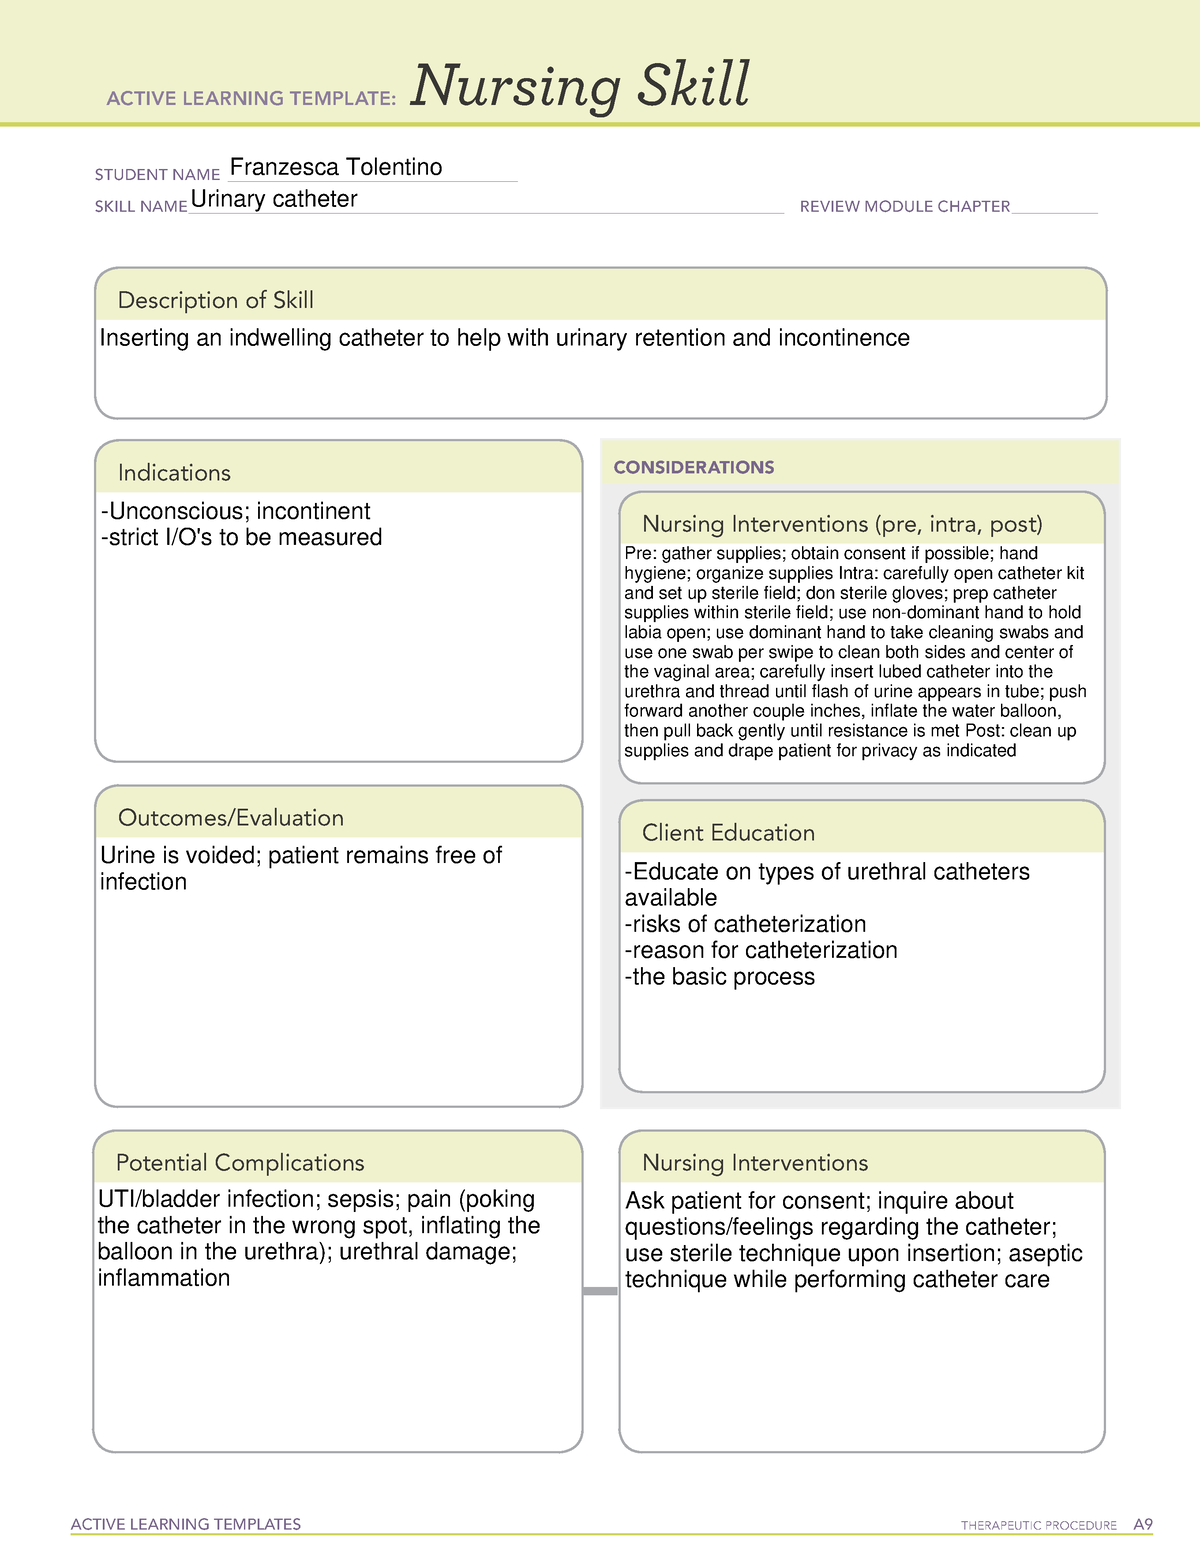 active-learning-template-nursing-skill-form-urinarycatheter-active-learning-templates